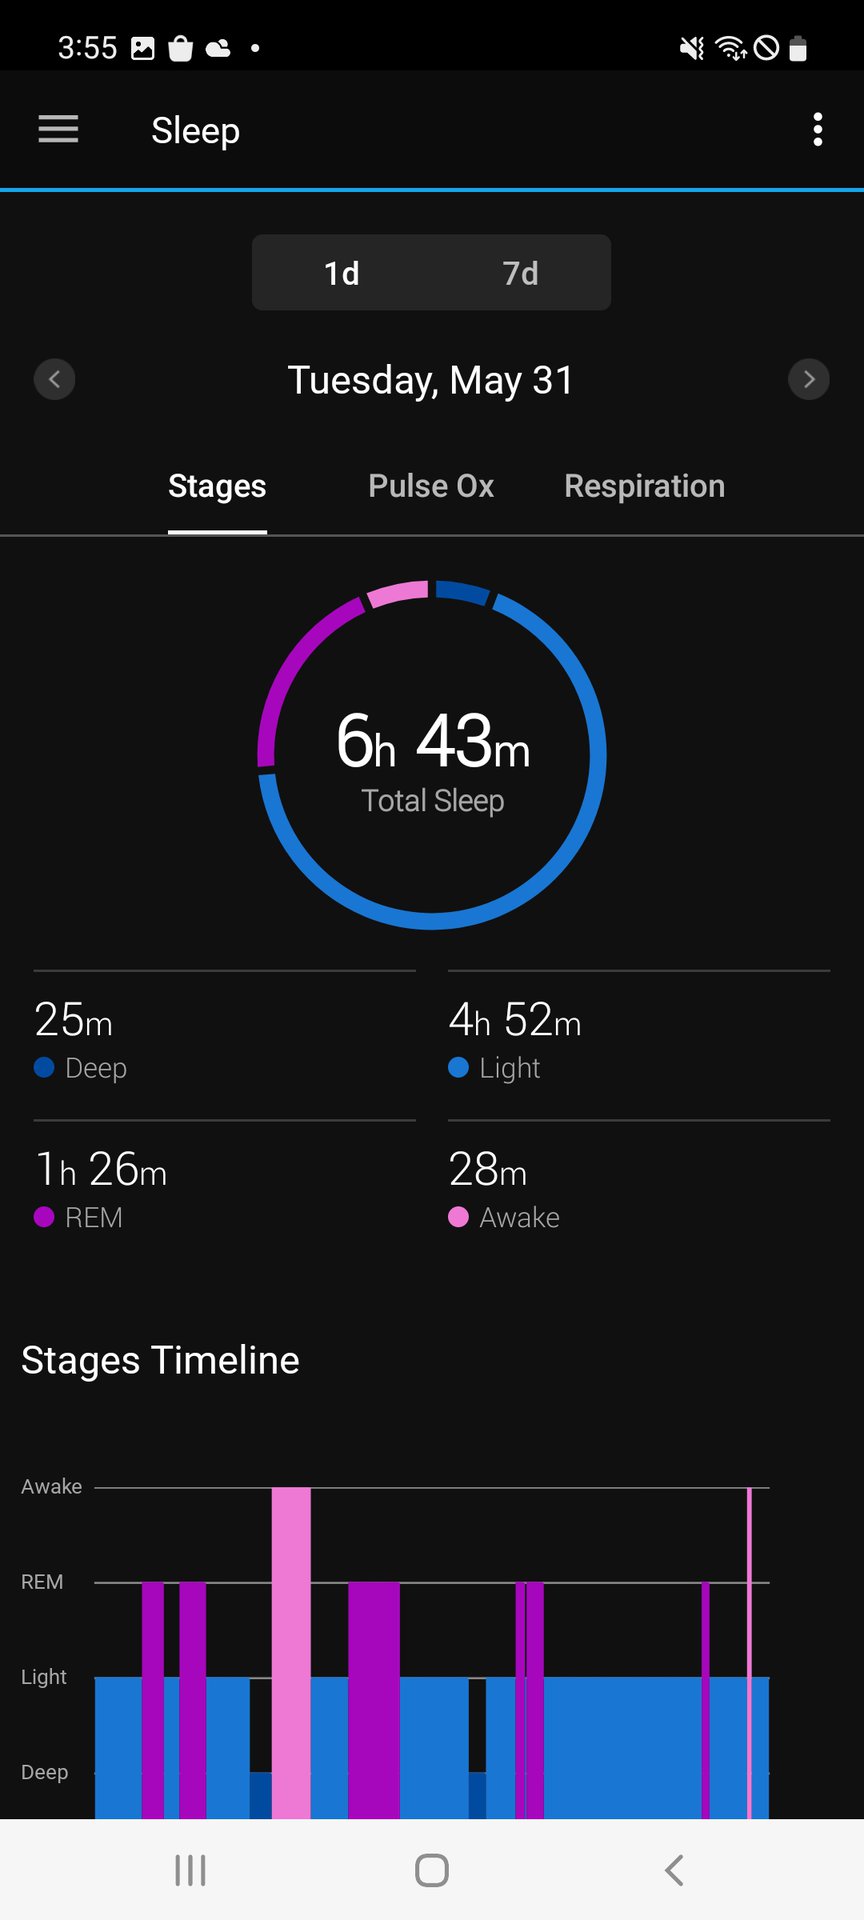 Krympe blod festspil Garmin sleep tracking: How to sleep deeper and better - Android Authority